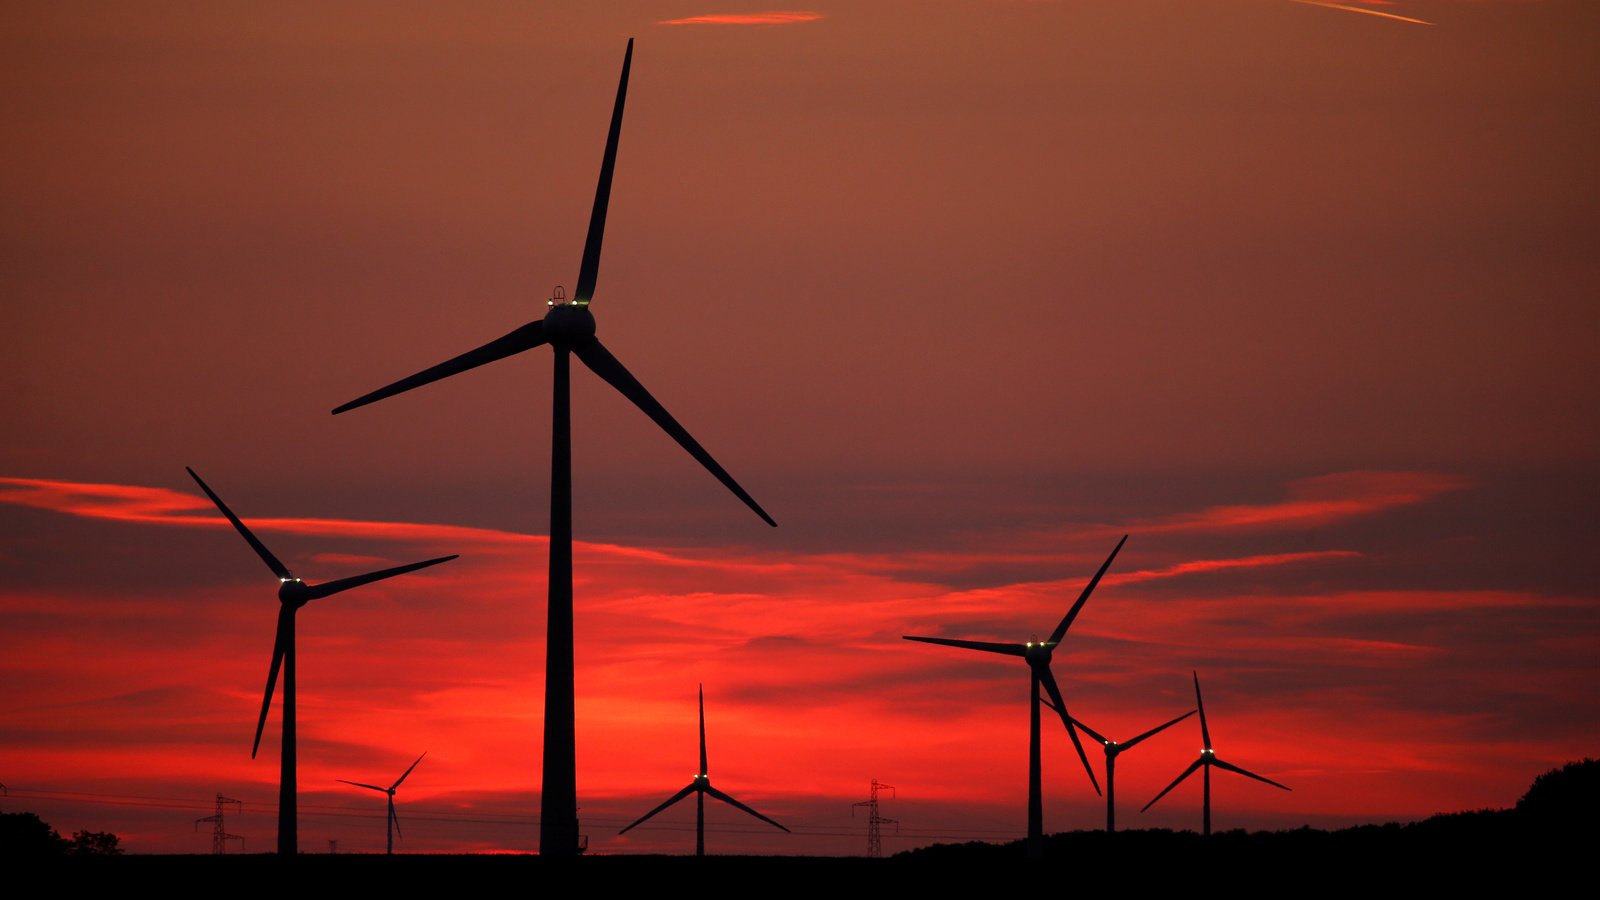 a-new-dawn-for-wind-energy-infrastructure-after-the-production-tax